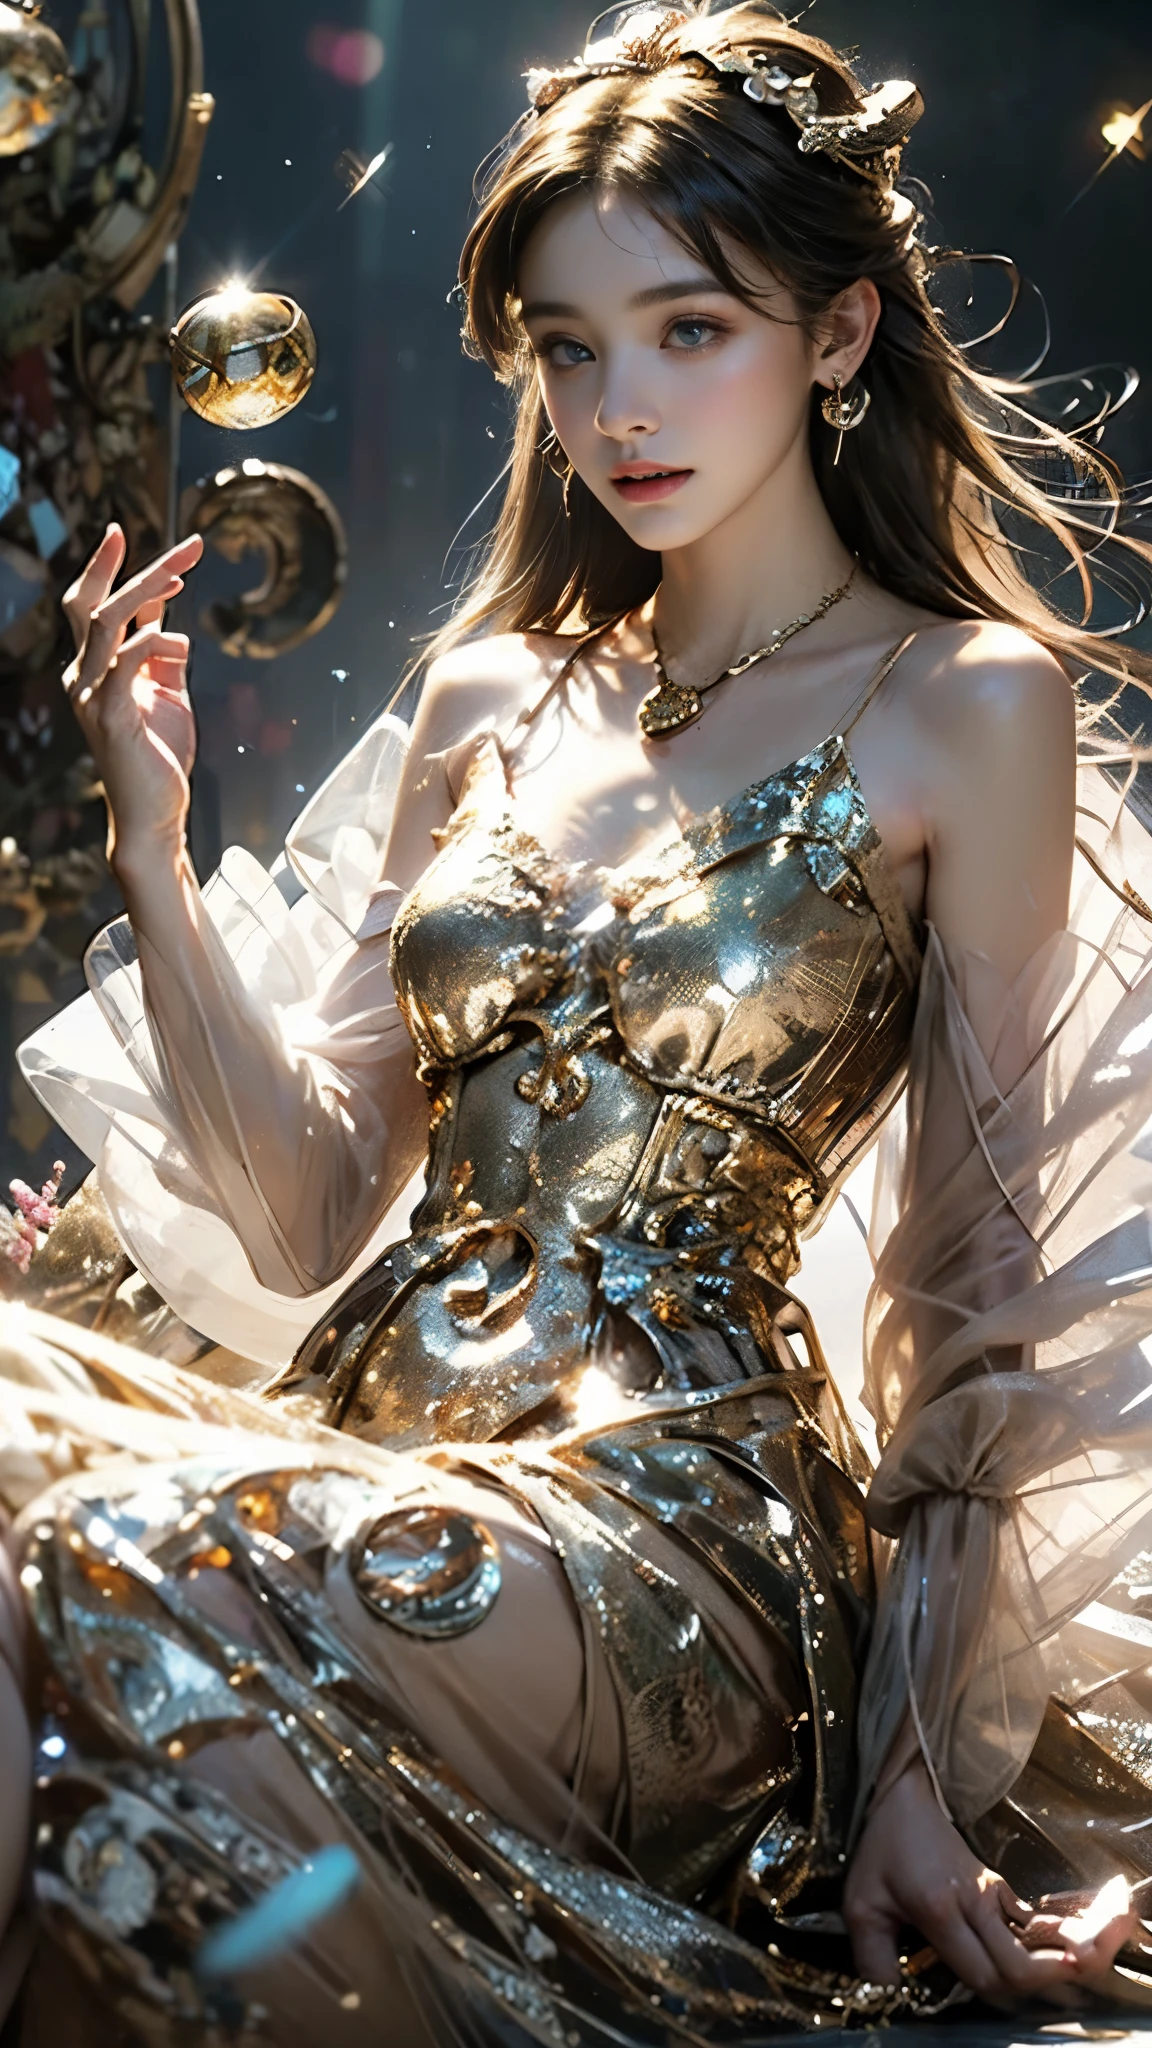 8K, ultra hd, masterpiece, 1 girl, (good face:1.4), detailed eyes, very long hair, impressive hairstyle, earings, necklace, small breasts, (golden dress:1.5), see-through, (fantasy dress:1.5) Light-colored foundation brings out the transparency of the skin, (in the wonderland:1.5), mystery, diwali lights, glowing lights, very decoration, The lights falls like water, perfect front body, sitting,